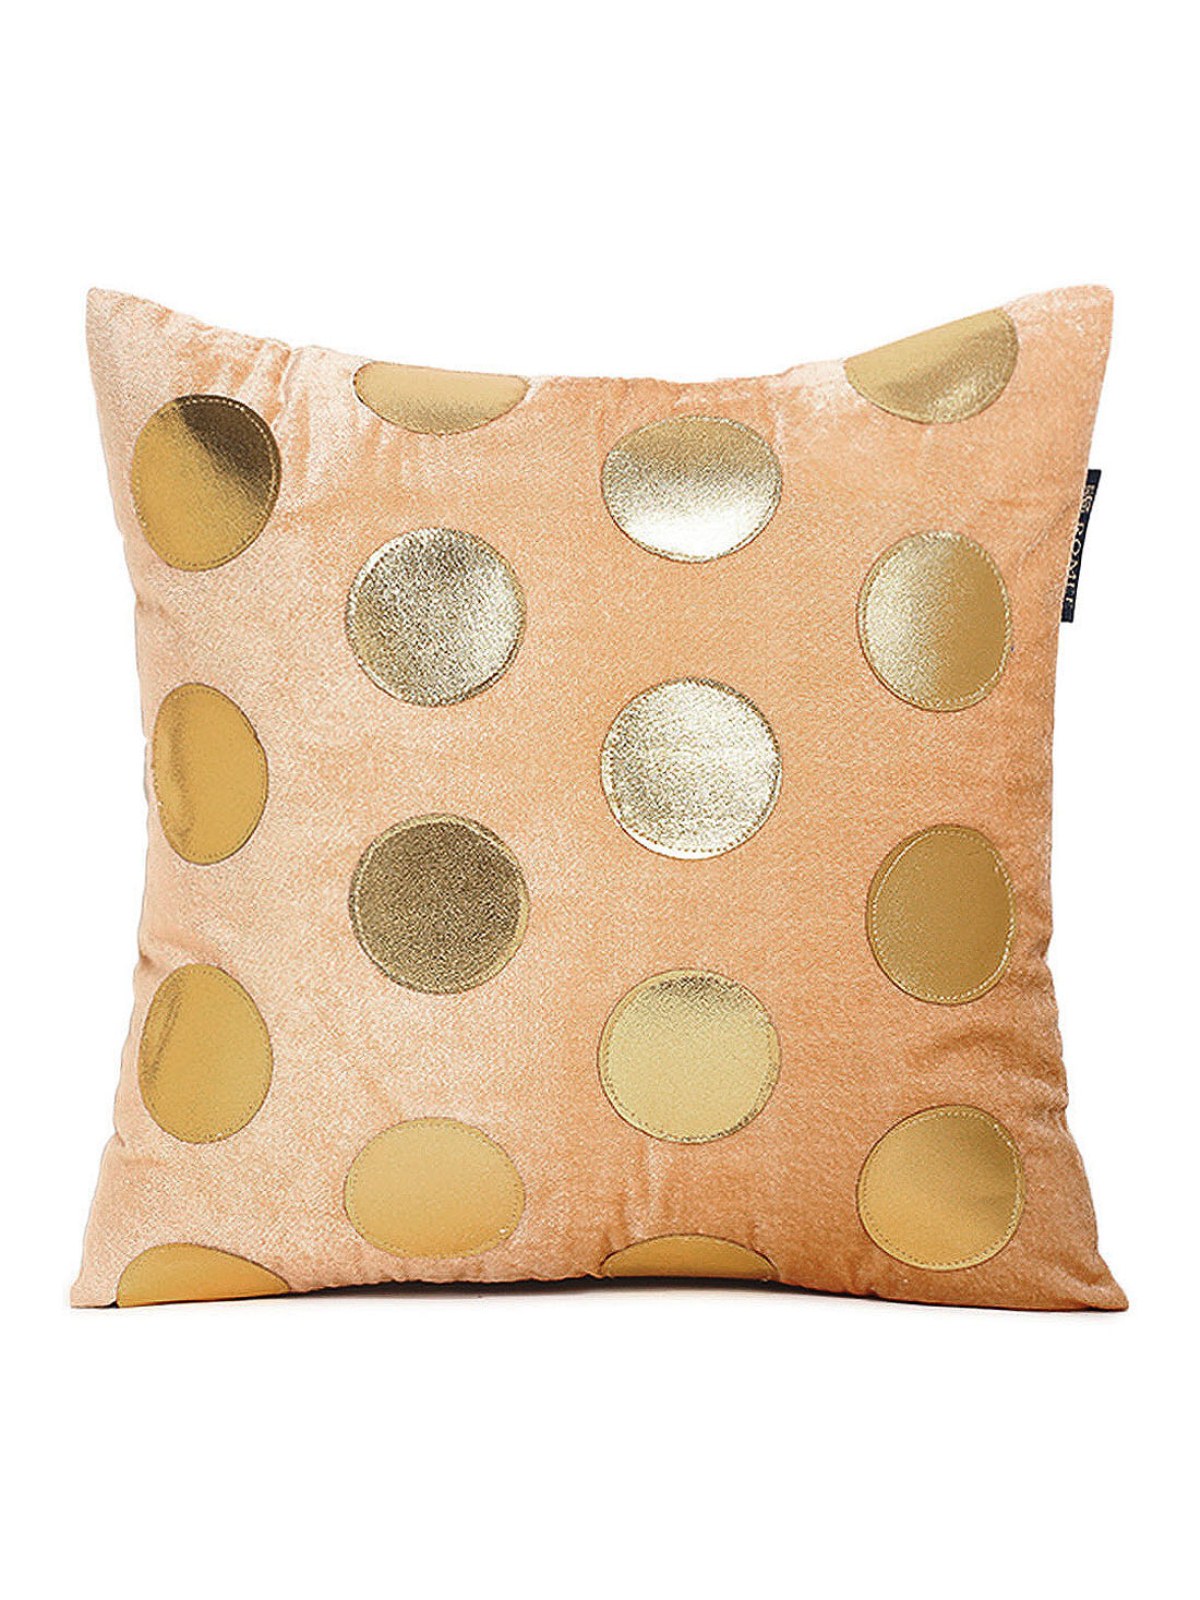 Soft Polyester Velvet Circle Patchwork Designer Cushion Covers 16x16 inches, Set of 5 - Beige